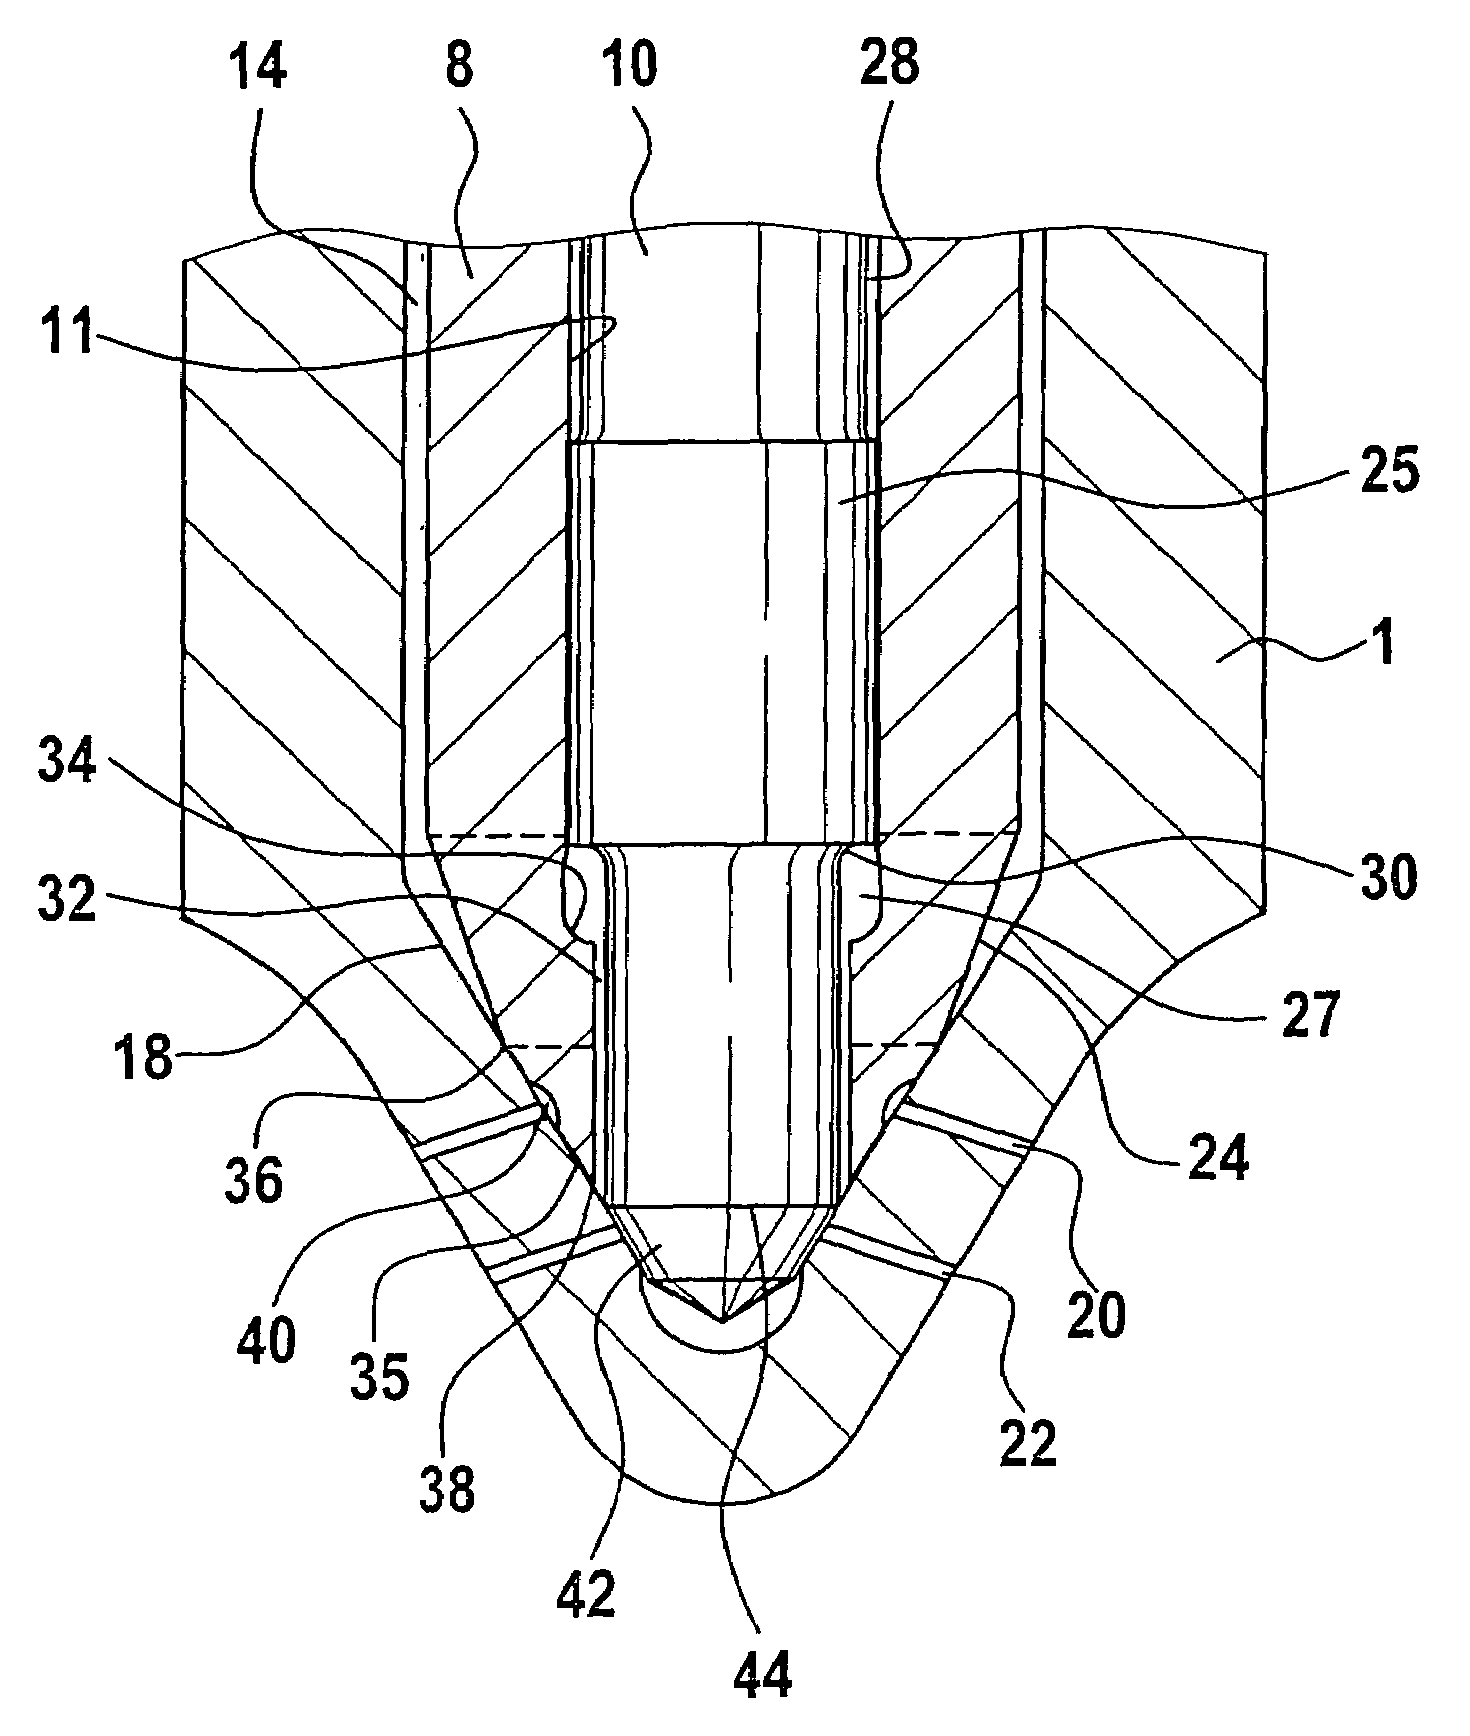 Fuel injection valve for internal combustion engines